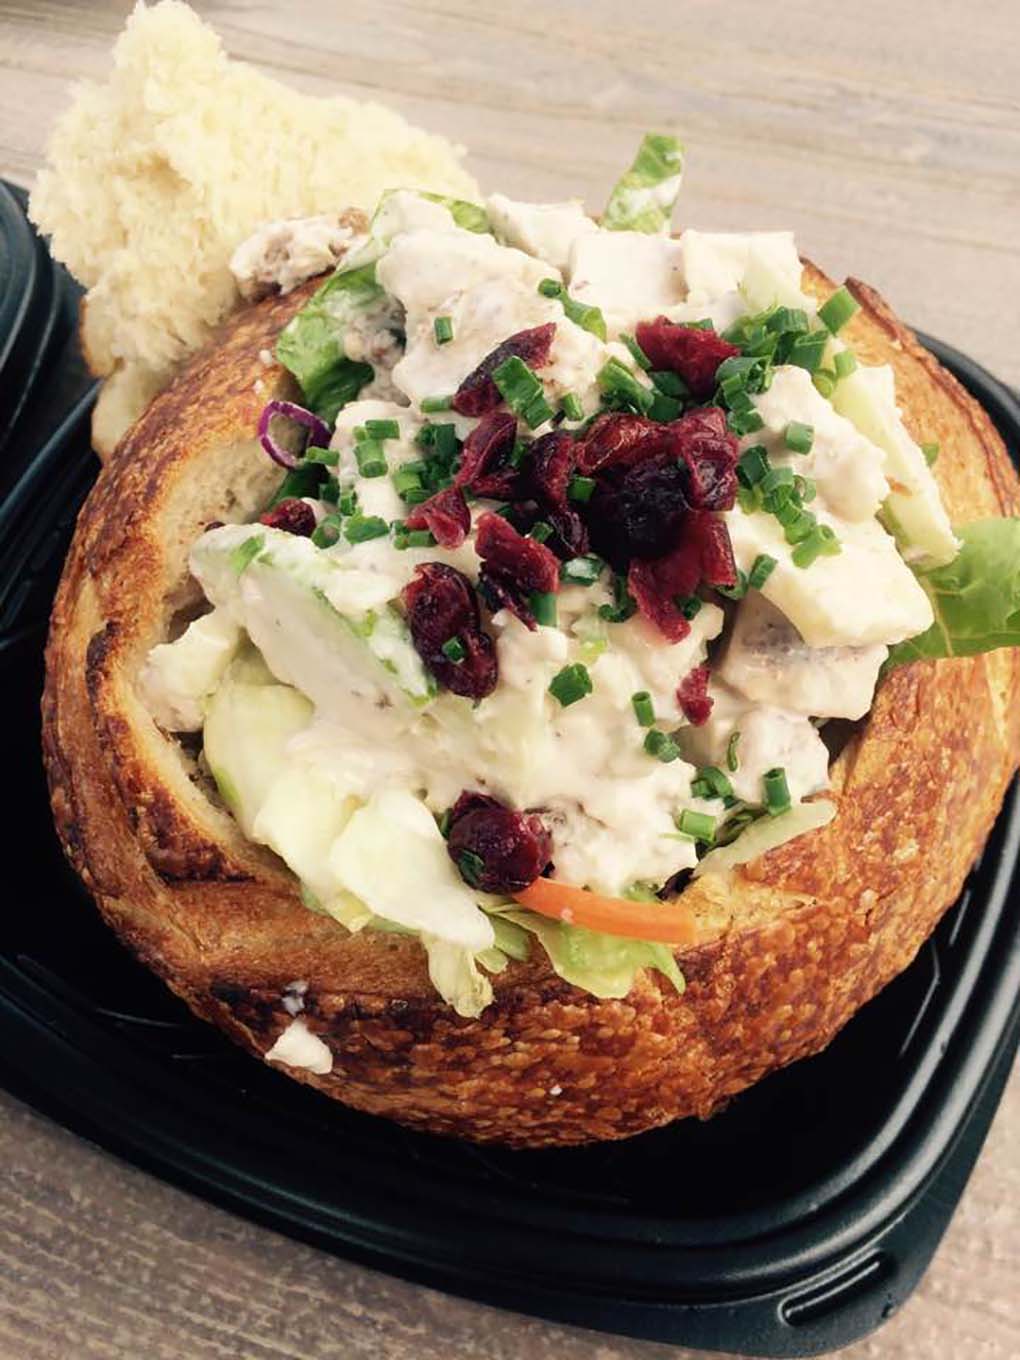 Chinese Chicken Salad in a bread bowl at Pacific Wharf Café in California Adventure Park